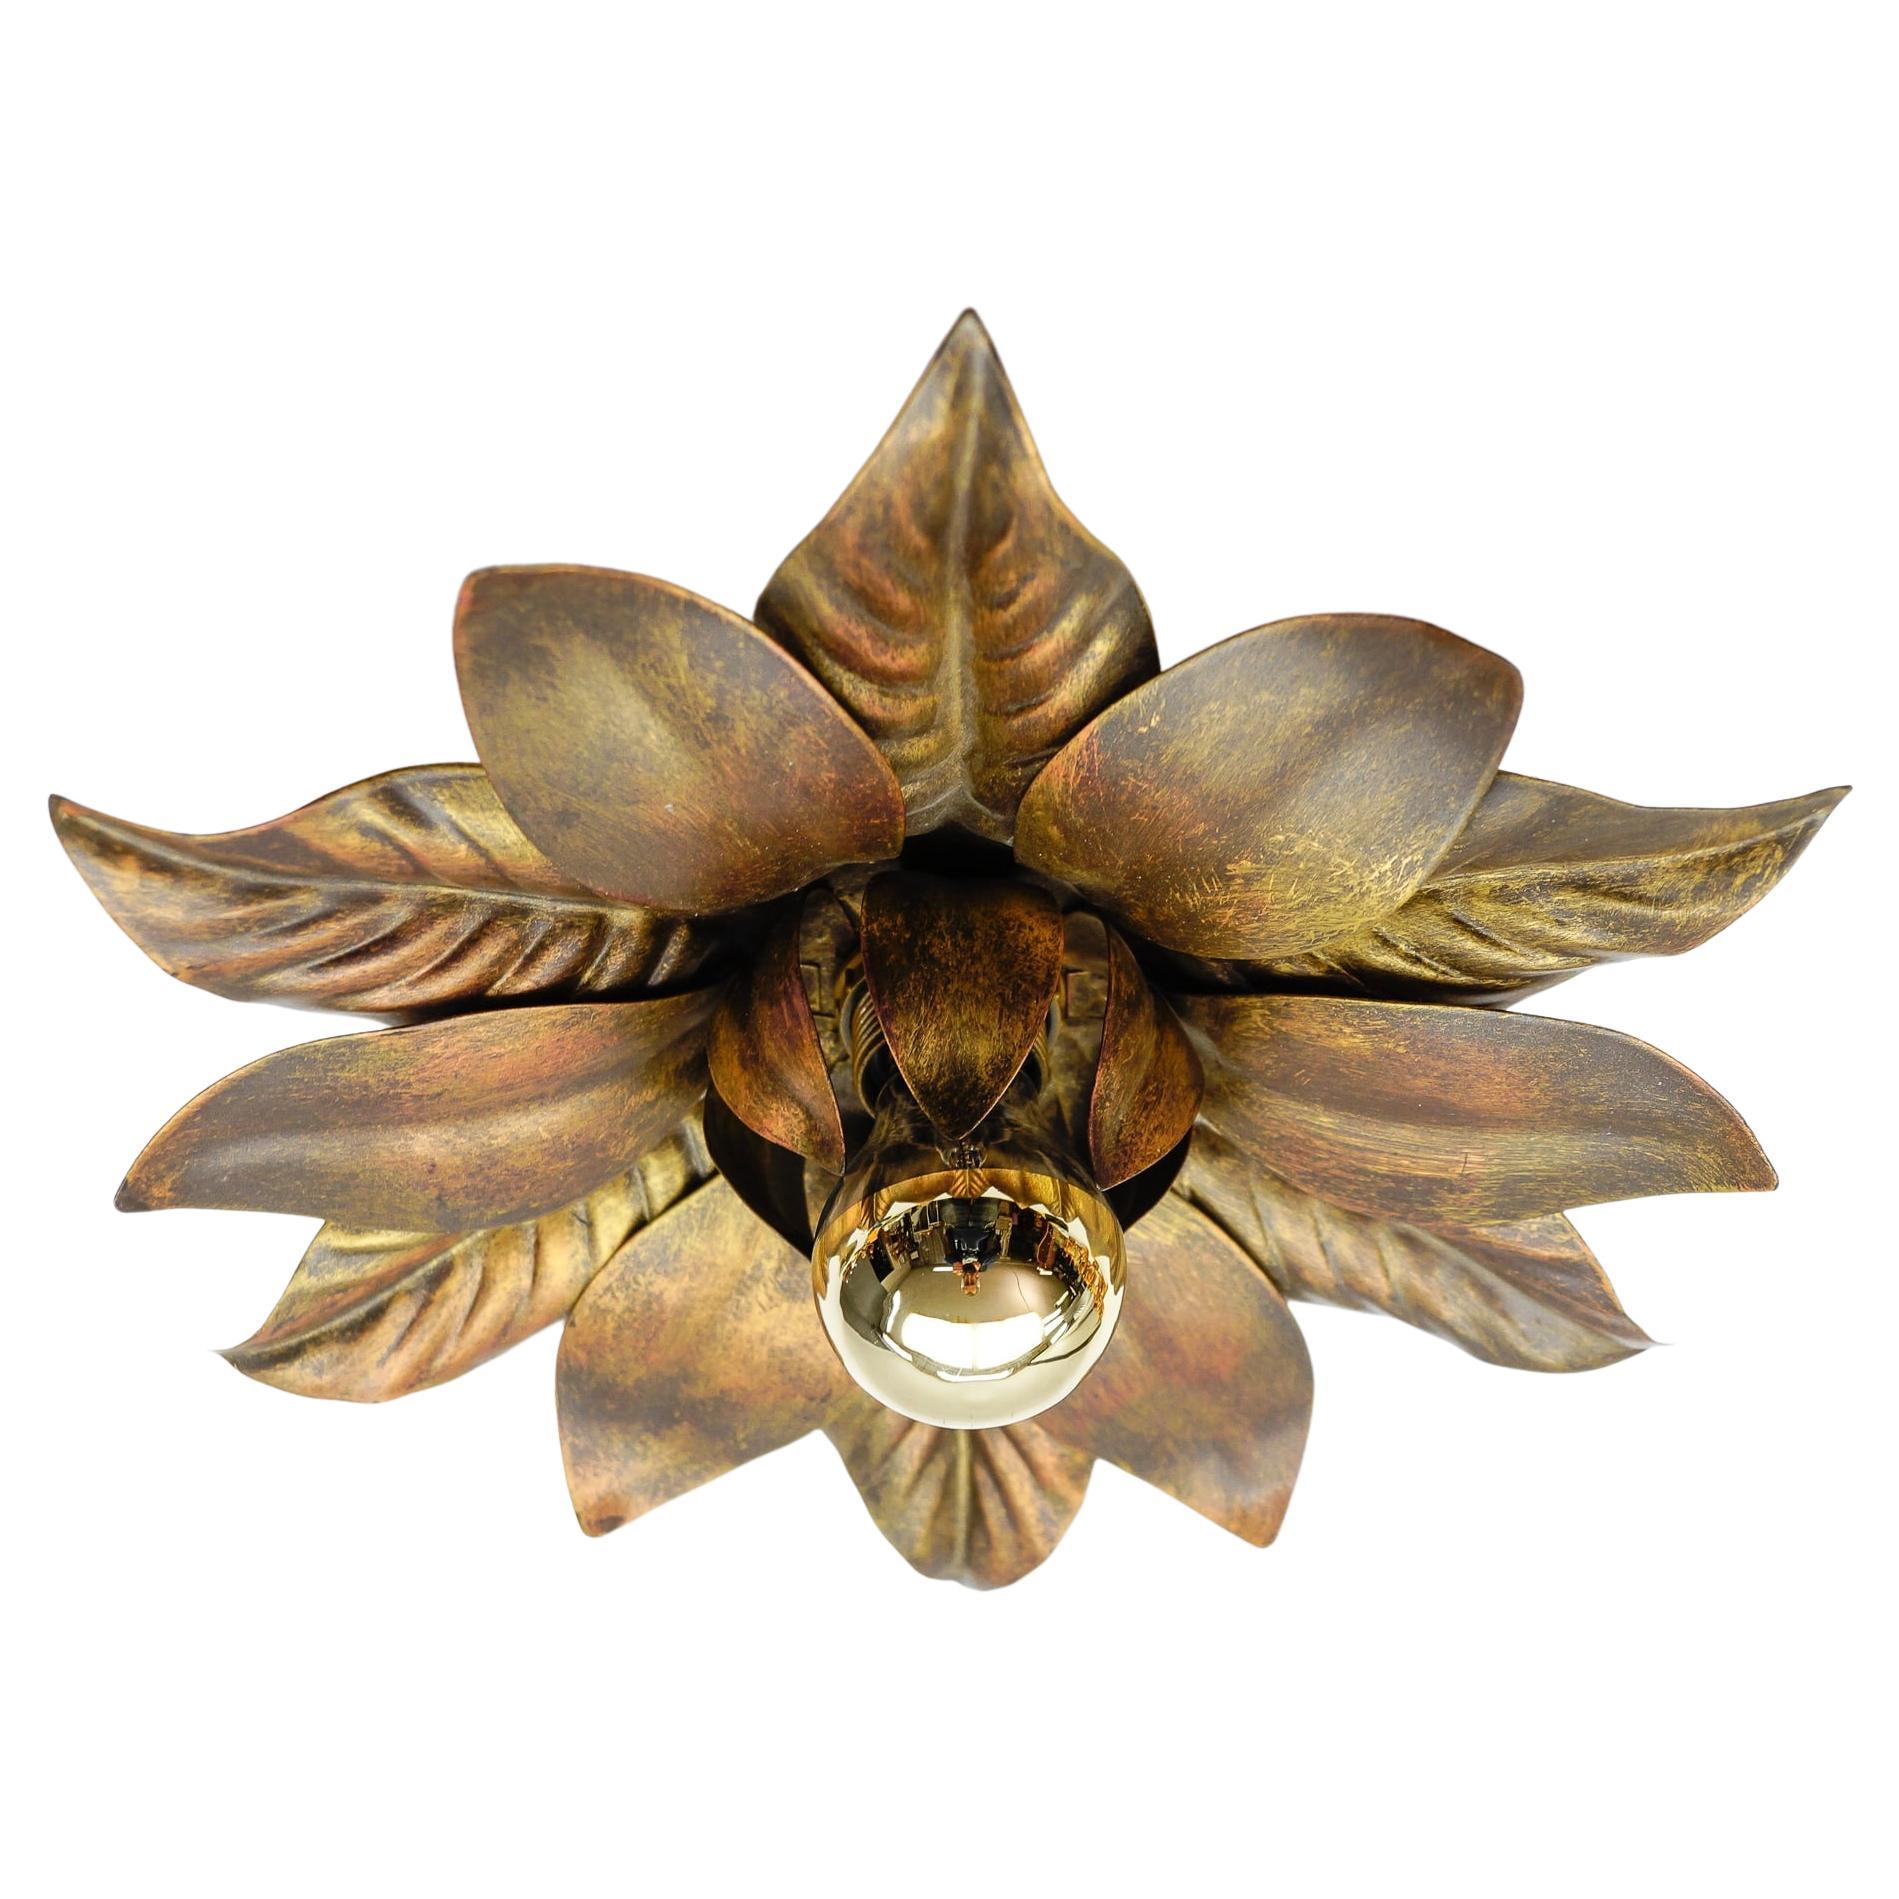 Awesome Gilded Florentine Wall or Ceiling Lamp, Italy 1960s